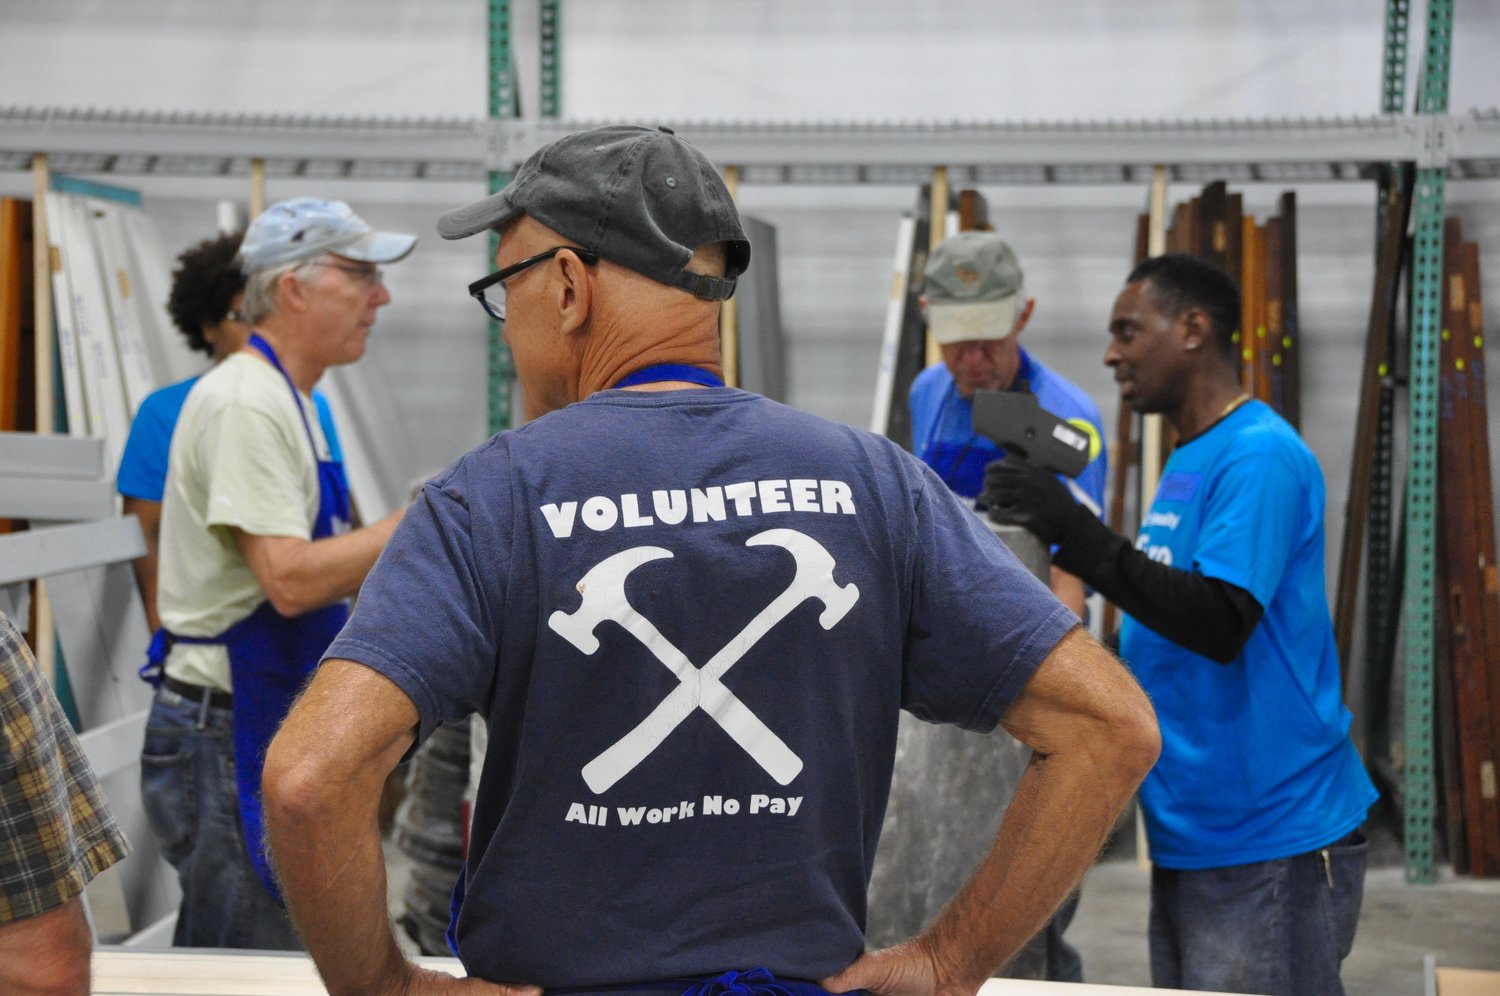 Volunteers assist staff at the ReStore locations. (Photo submitted)